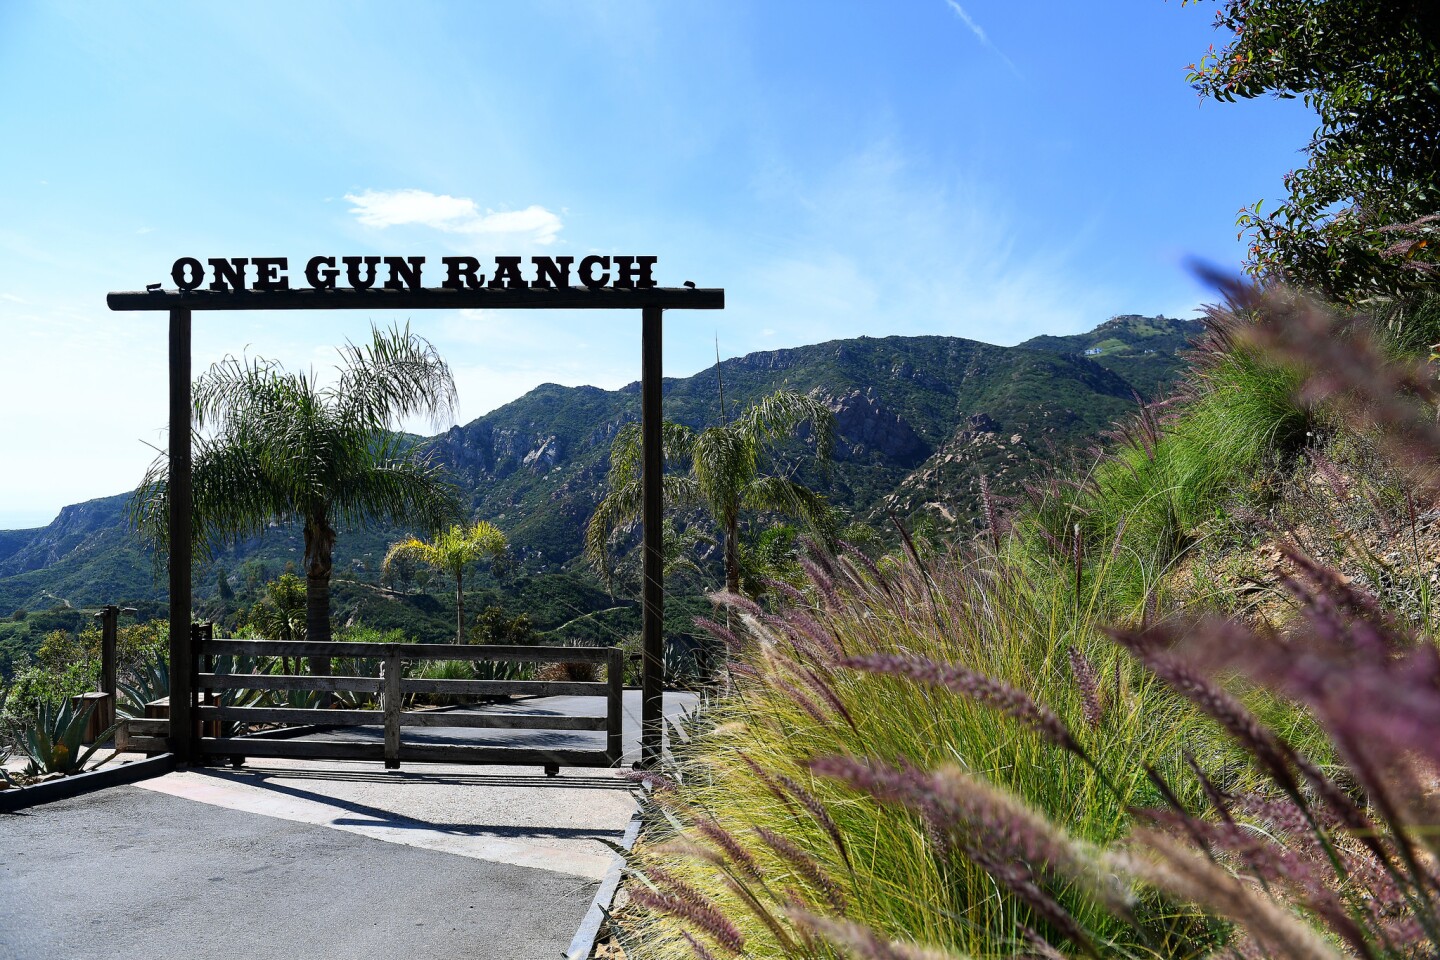 The entrance to One Gun Ranch in Malibu, a 24-acre biodynamic ranch nestled in the mountains overlooking the ocean, where owners Alice Bamford and Ann Eysenring are growing 50 different crops and raising rescued animals.